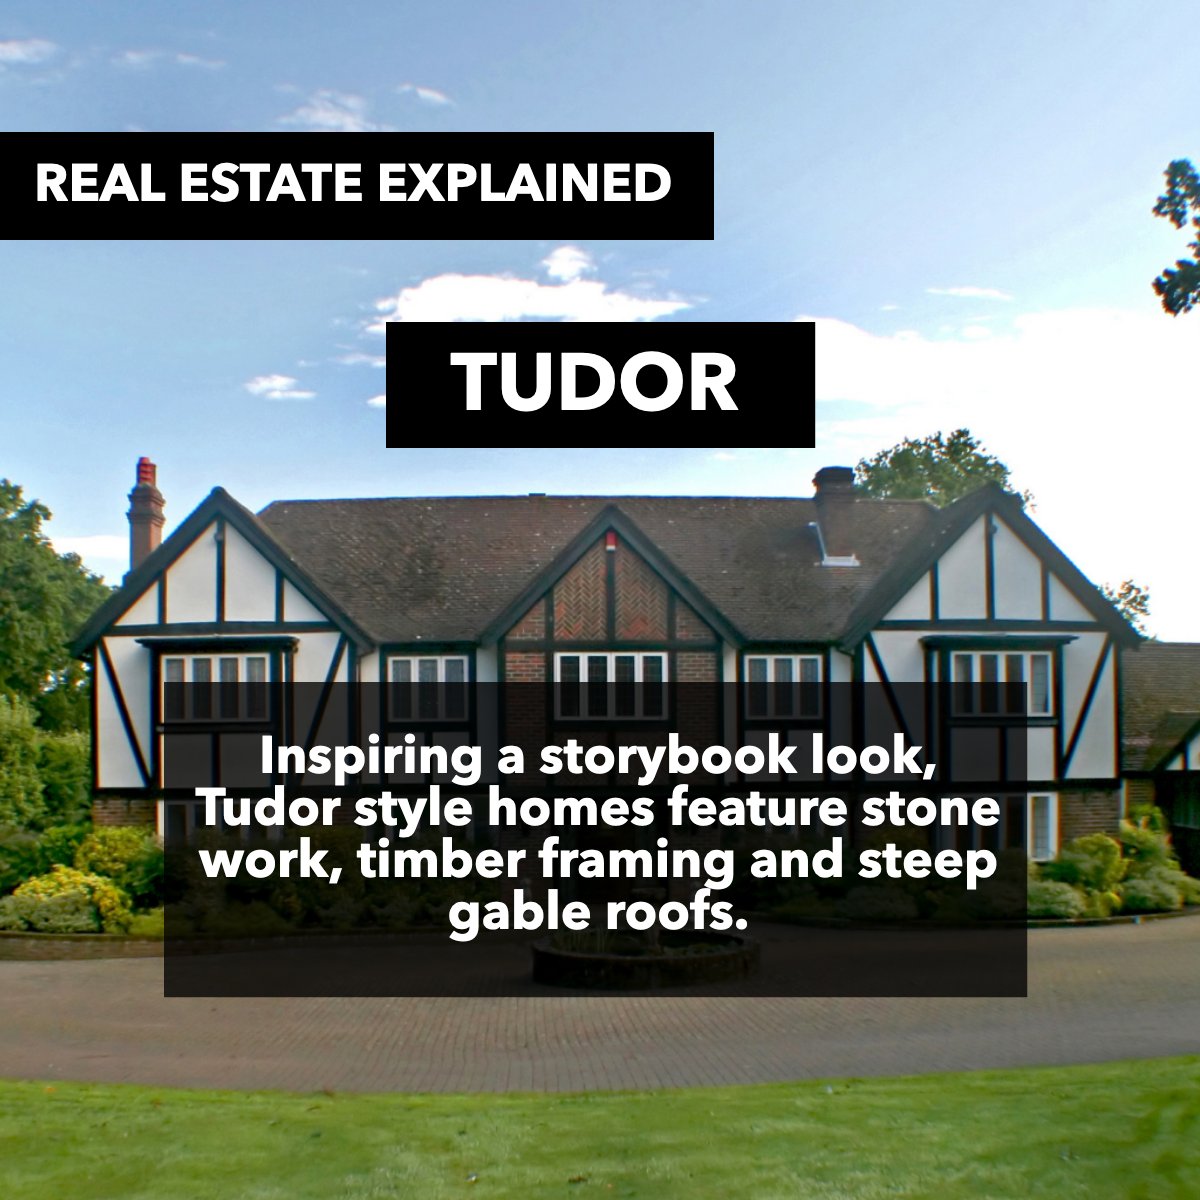 Charming, intricate, and classic, Tudor-style homes have been an iconic home style in North America since the 19th century. 🏘️

#tudorstylearchitecture #tudorstylehome #styletudors